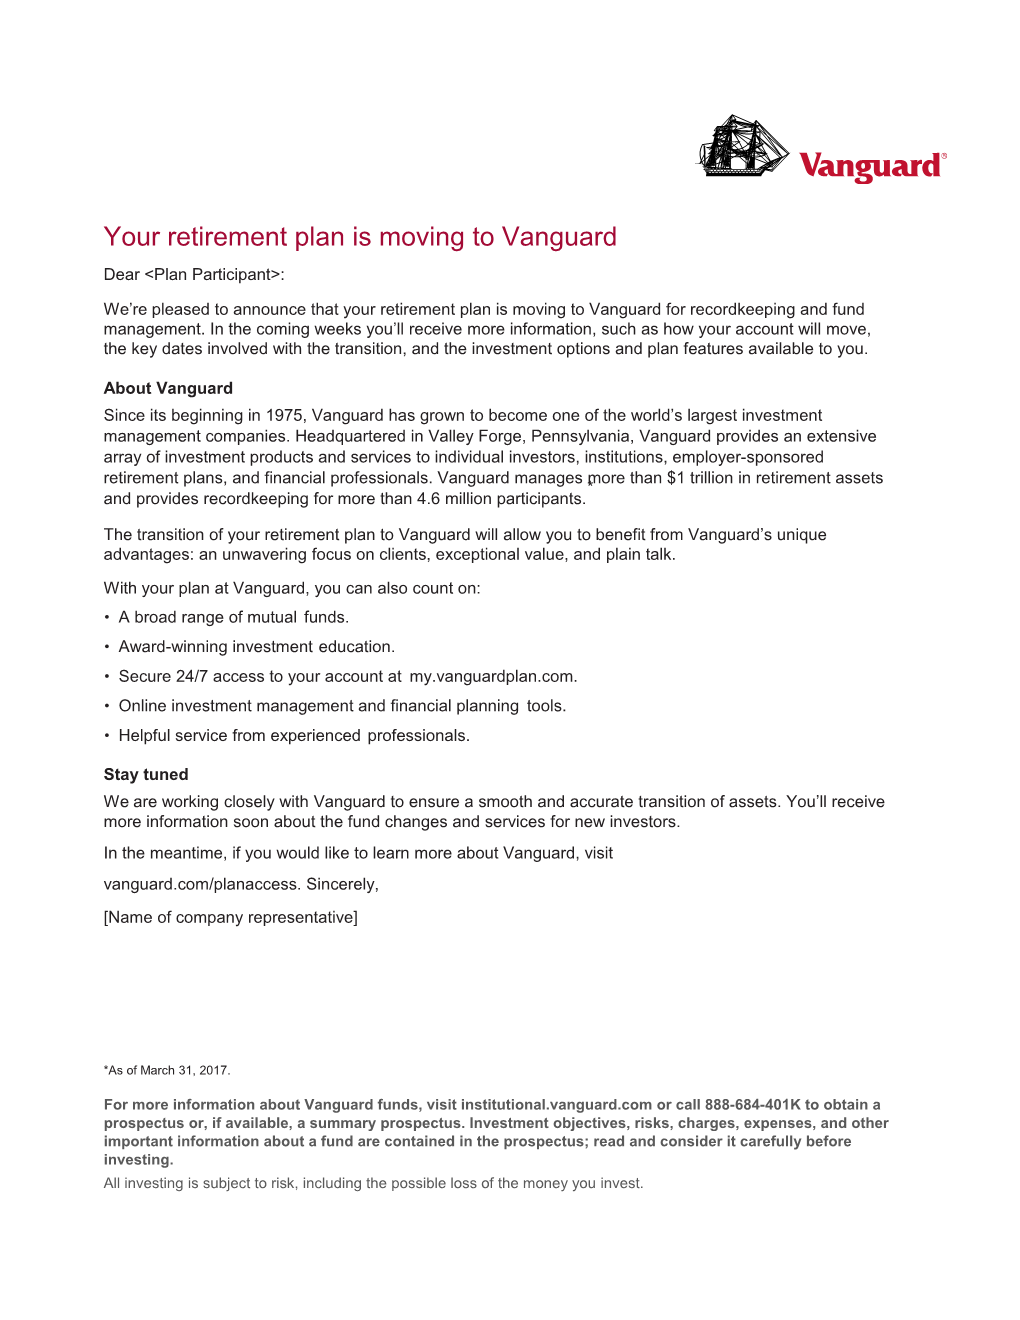 Your Retirement Plan Is Moving to Vanguard